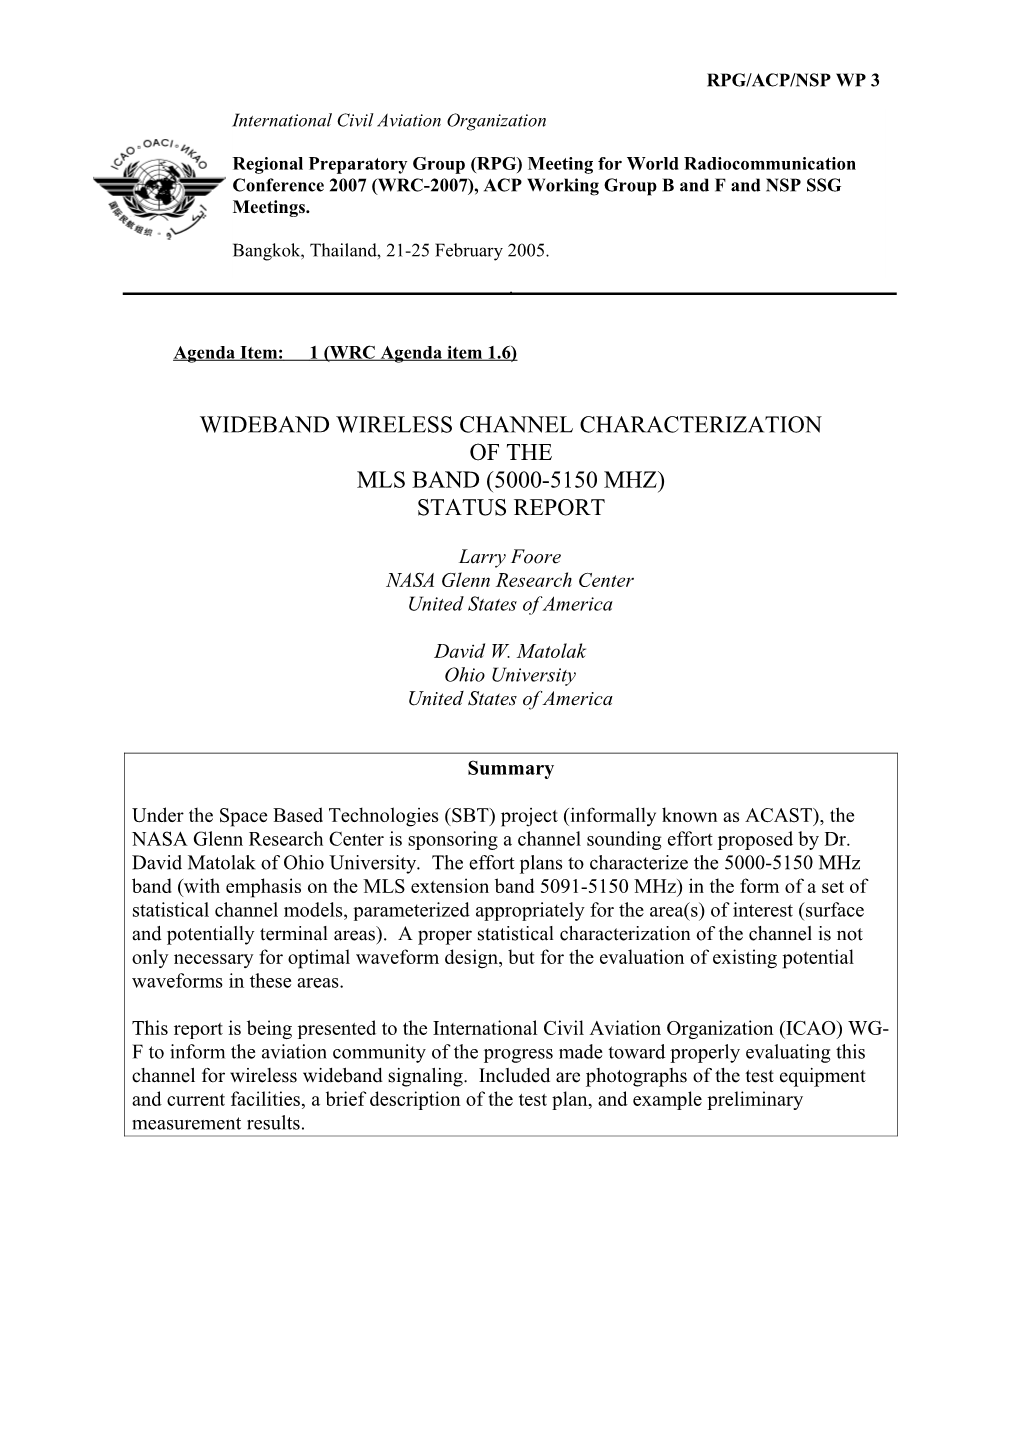 Wideband Wireless Channel Characterization of the MLS Band (5000-5150 Mhz) Status Report